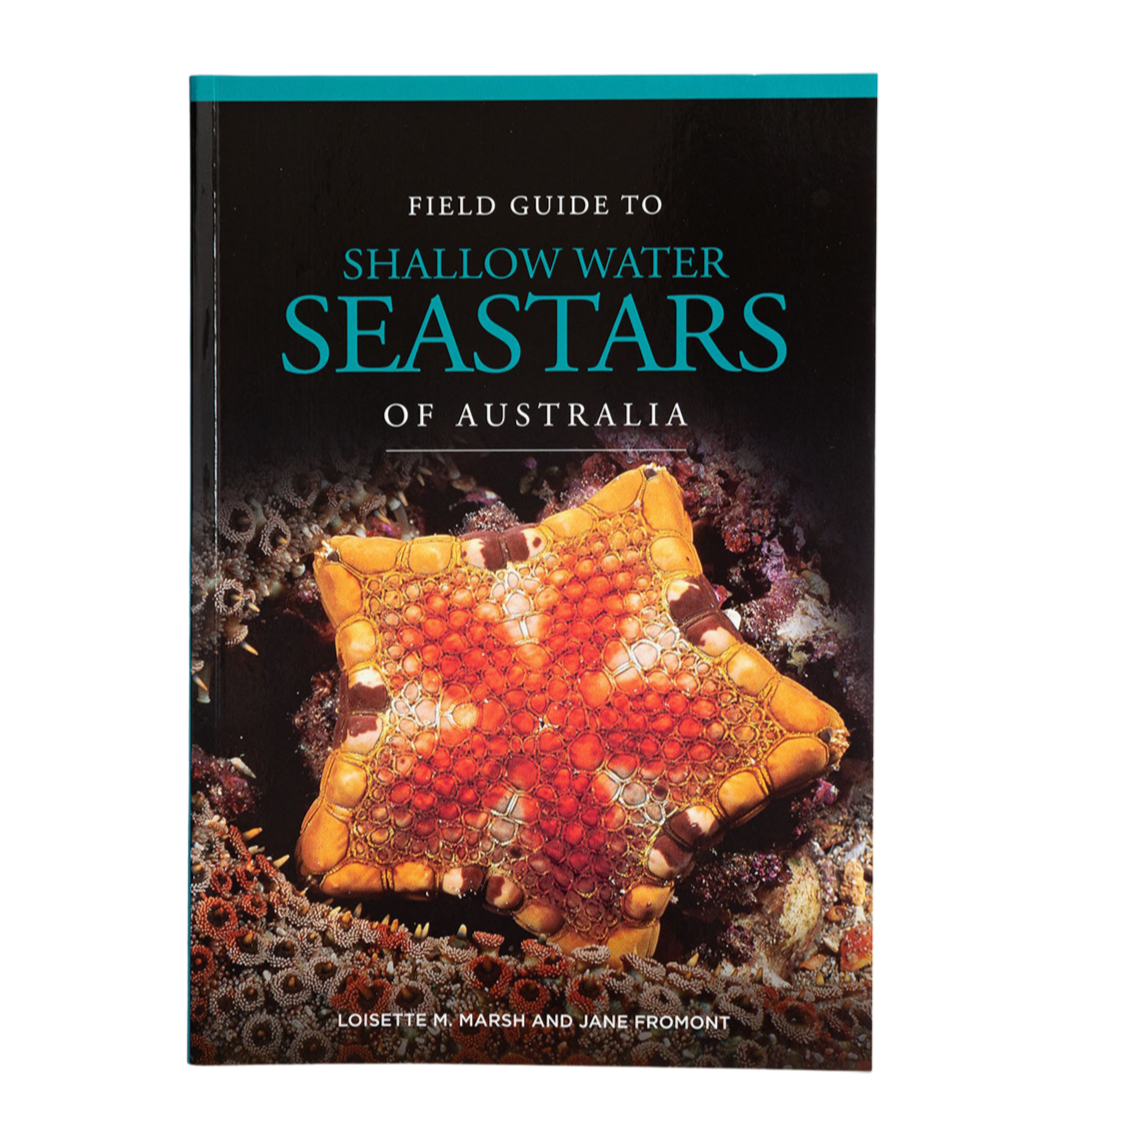 Field Guide to Shallow Water Seastars of Australia by Loisette M. Marsh and Jane Fromont